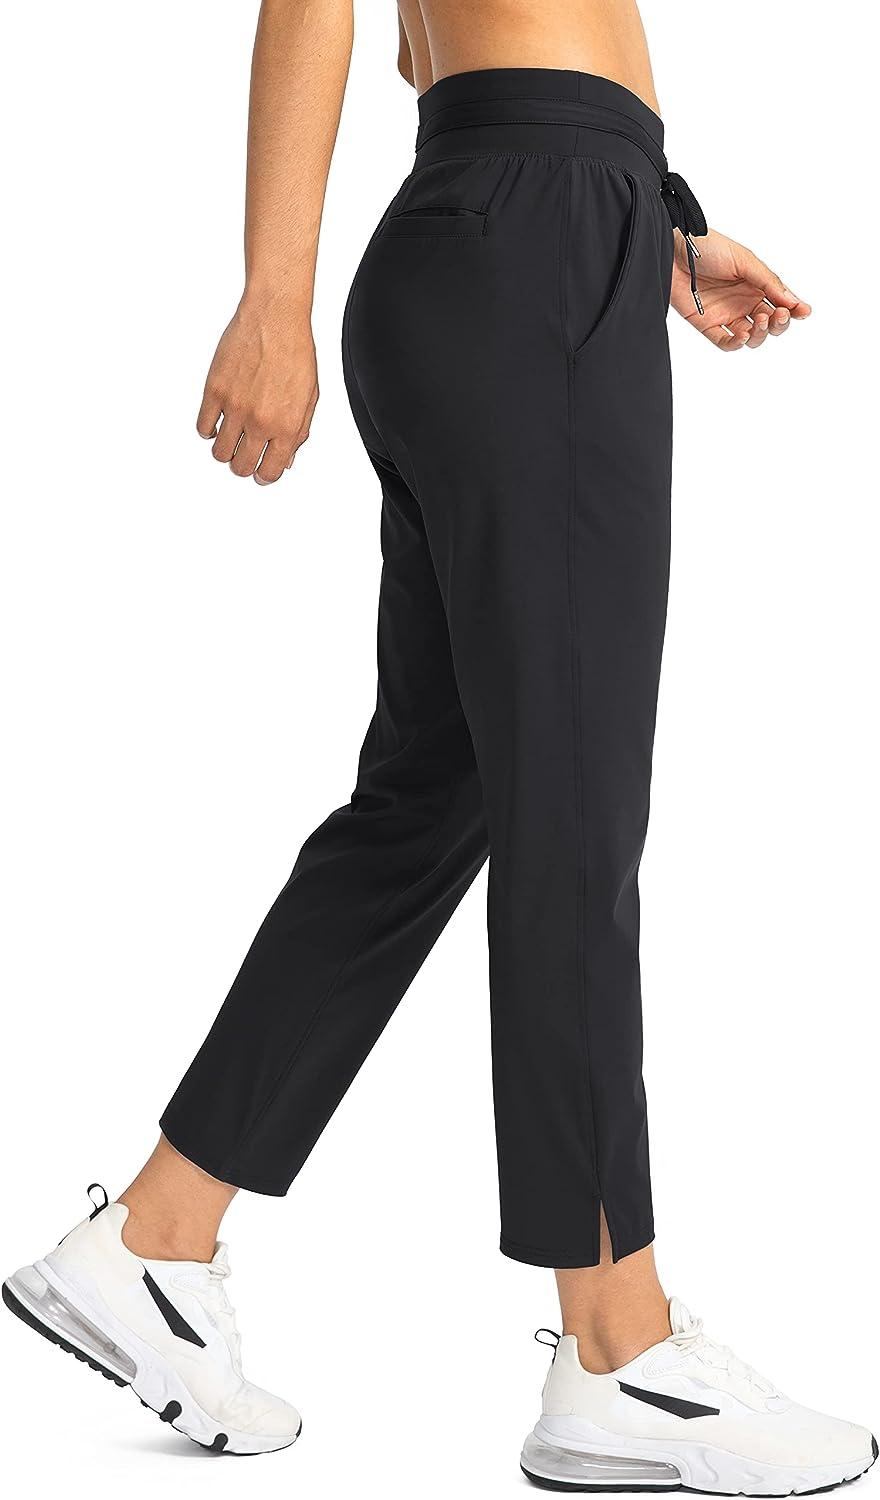 Soothfeel Women's Golf Pants with 4 Pockets 7/8 Stretch High Wasited  Sweatpants Travel Athletic Work Pants for Women Black Medium